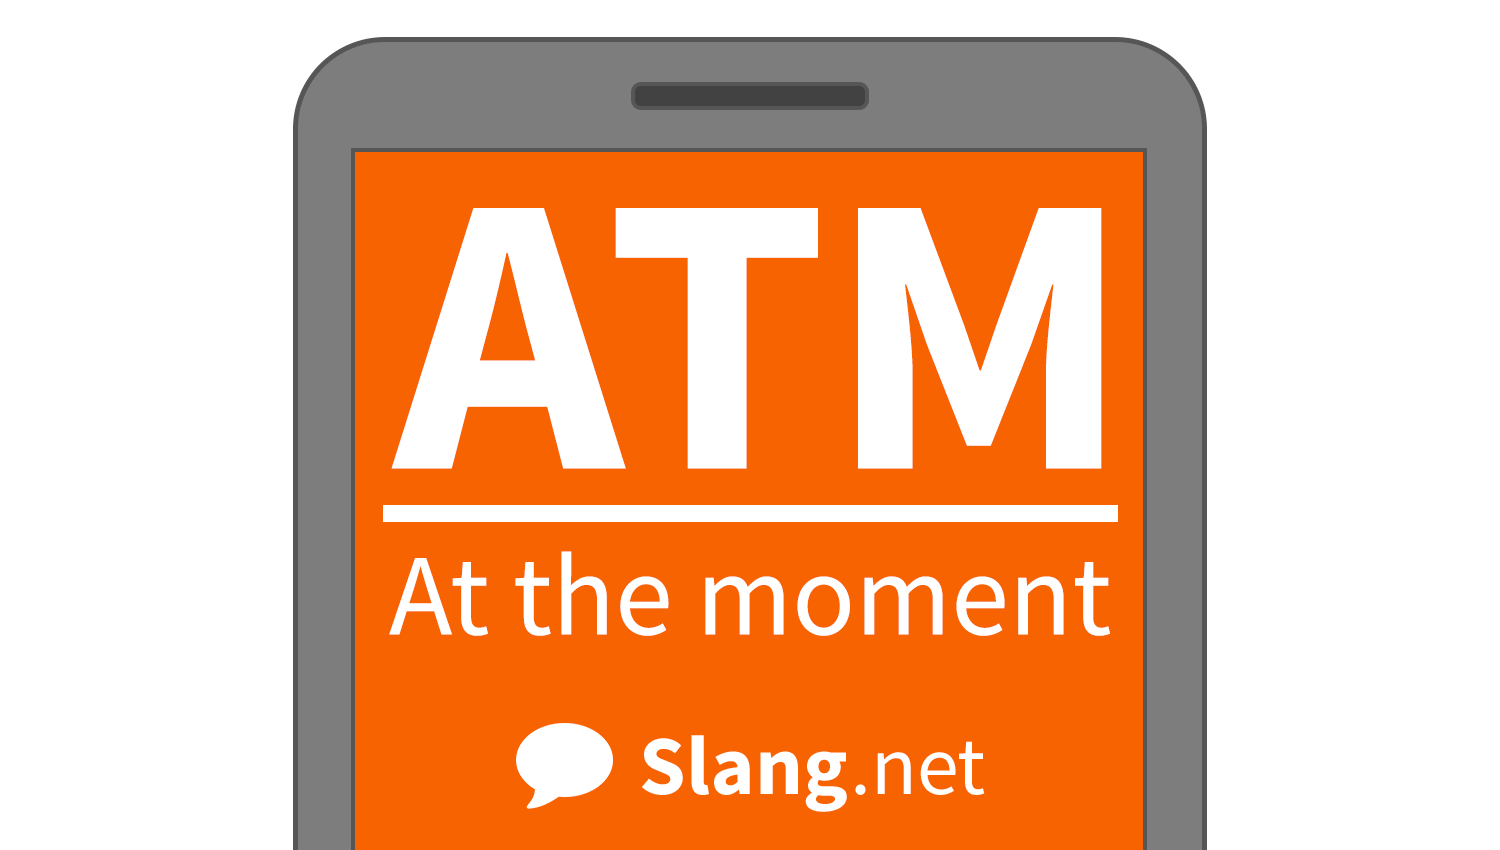 You may see &quot;ATM&quot; (or &quot;atm&quot;) in messages to mean &quot;at the moment&quot;